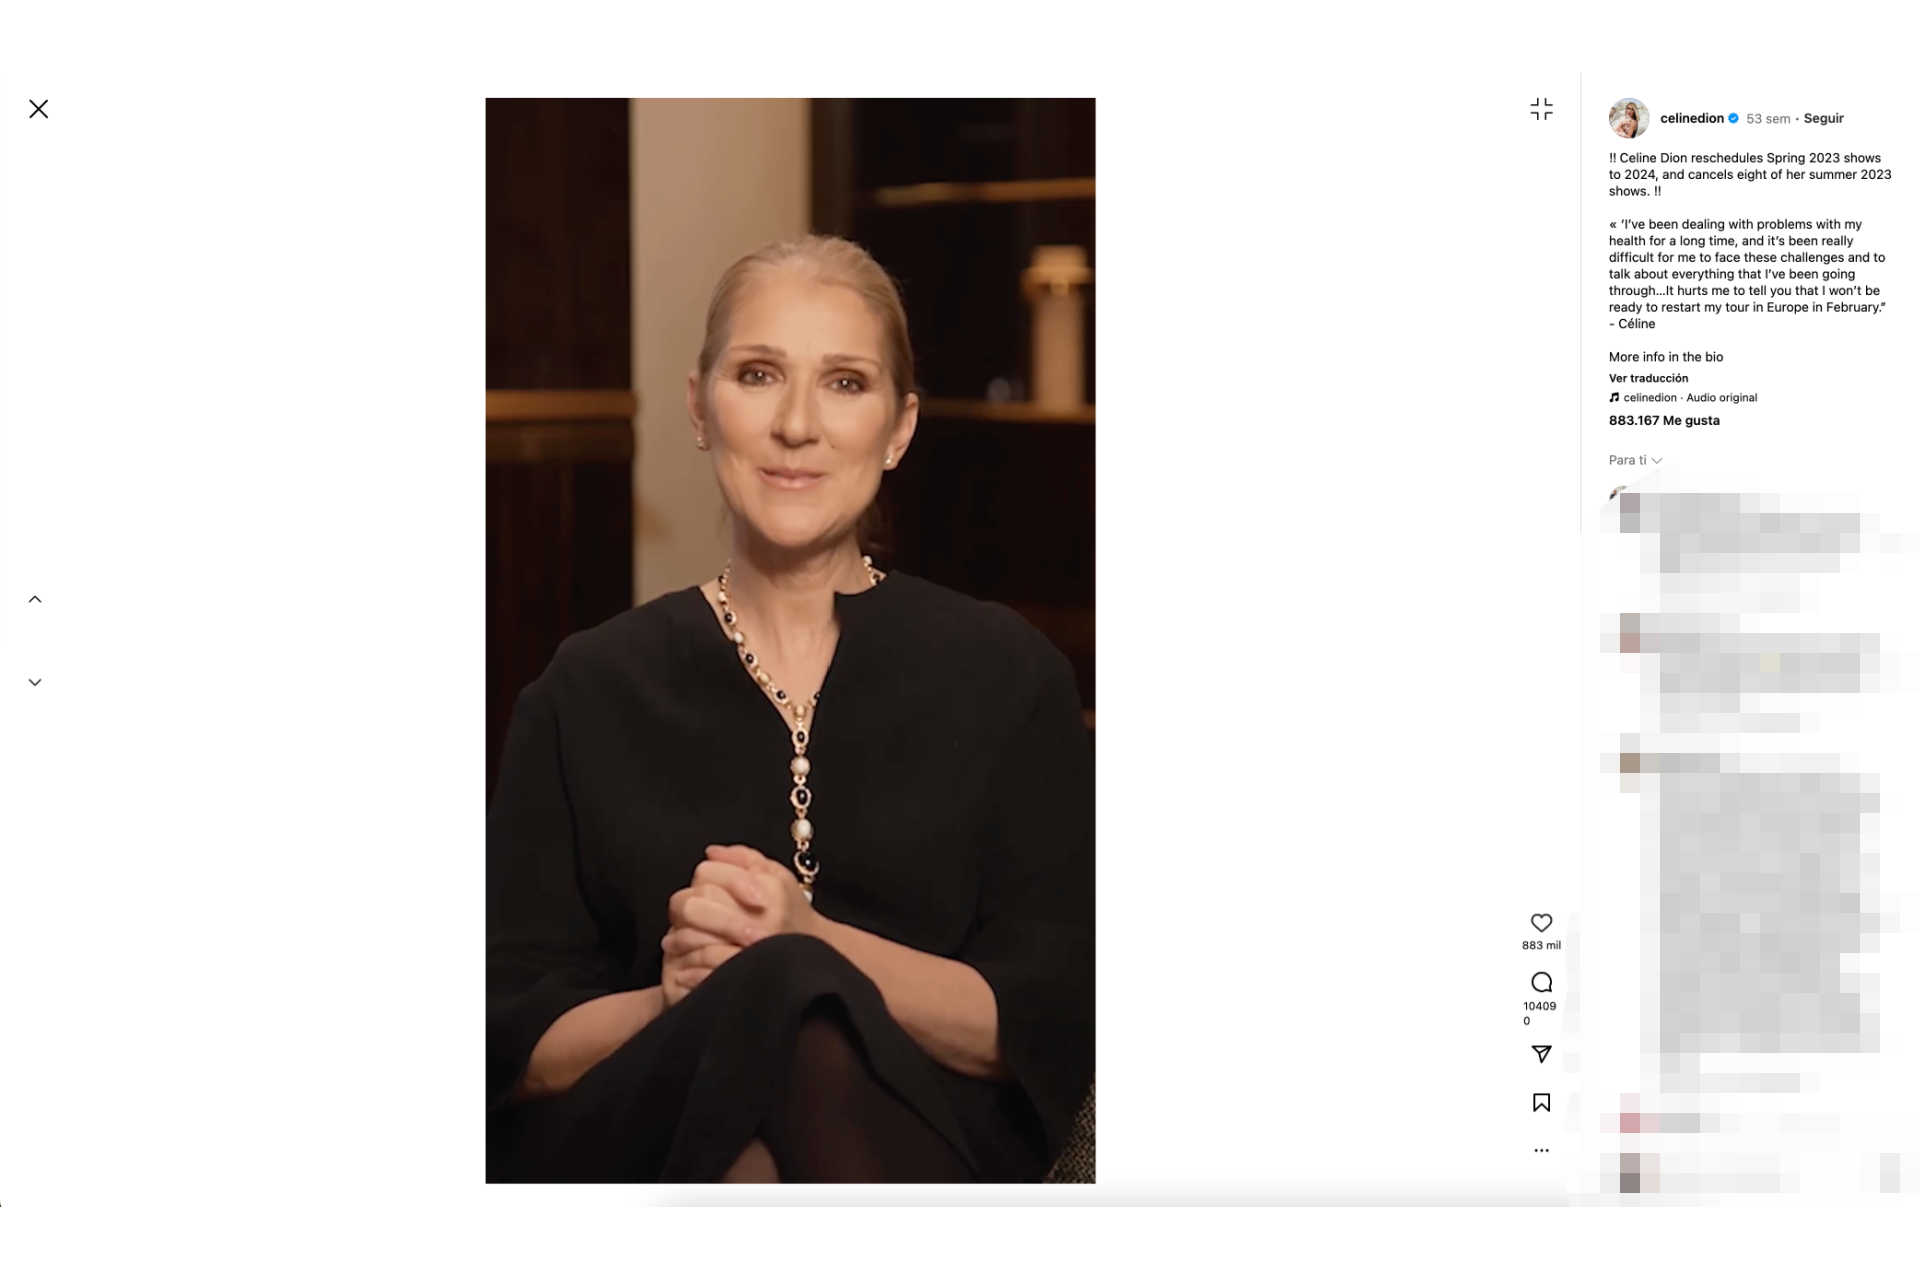 Celine Dion herself spoke about the condition